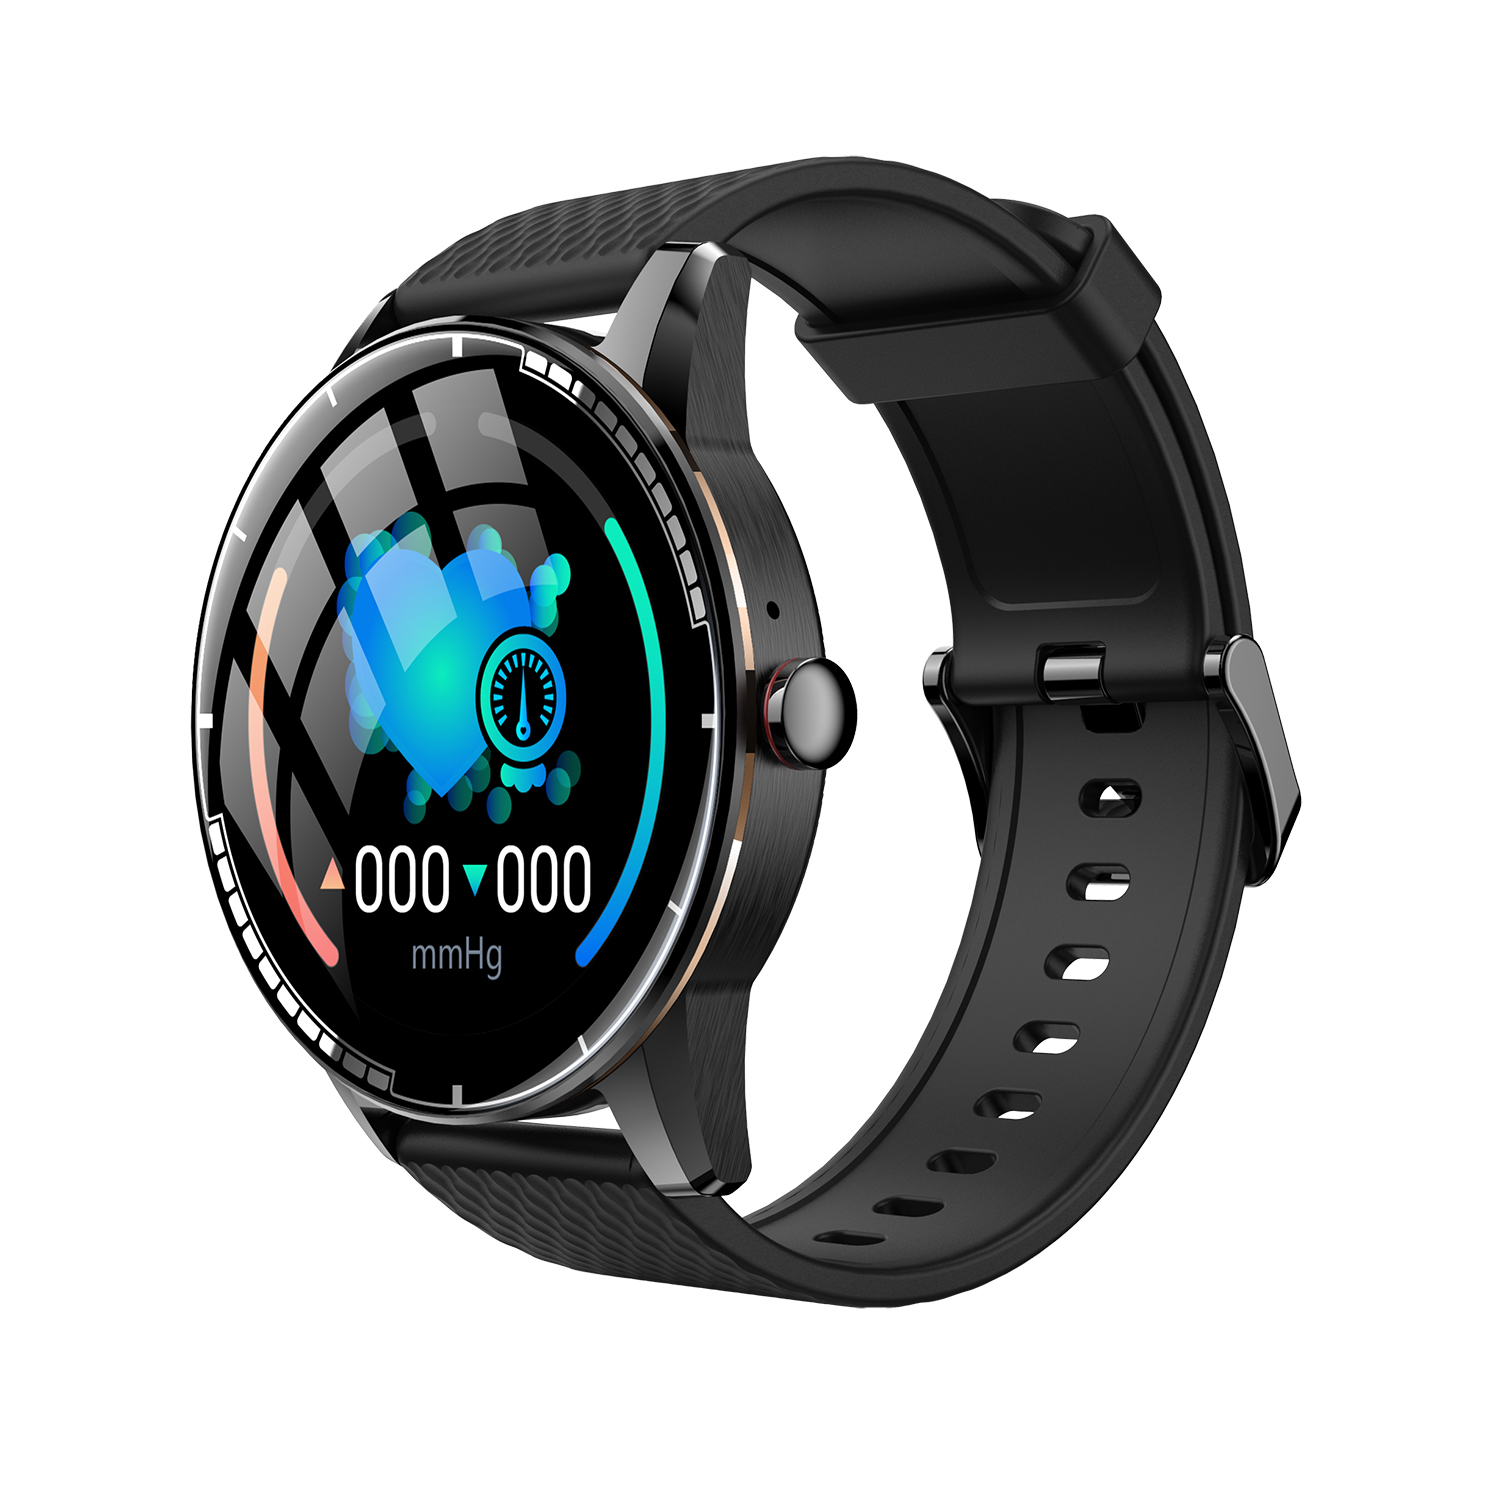 IP67 High Sound Quality Sleep Monitoring Smart Music Sport Watch with Bt Call H6